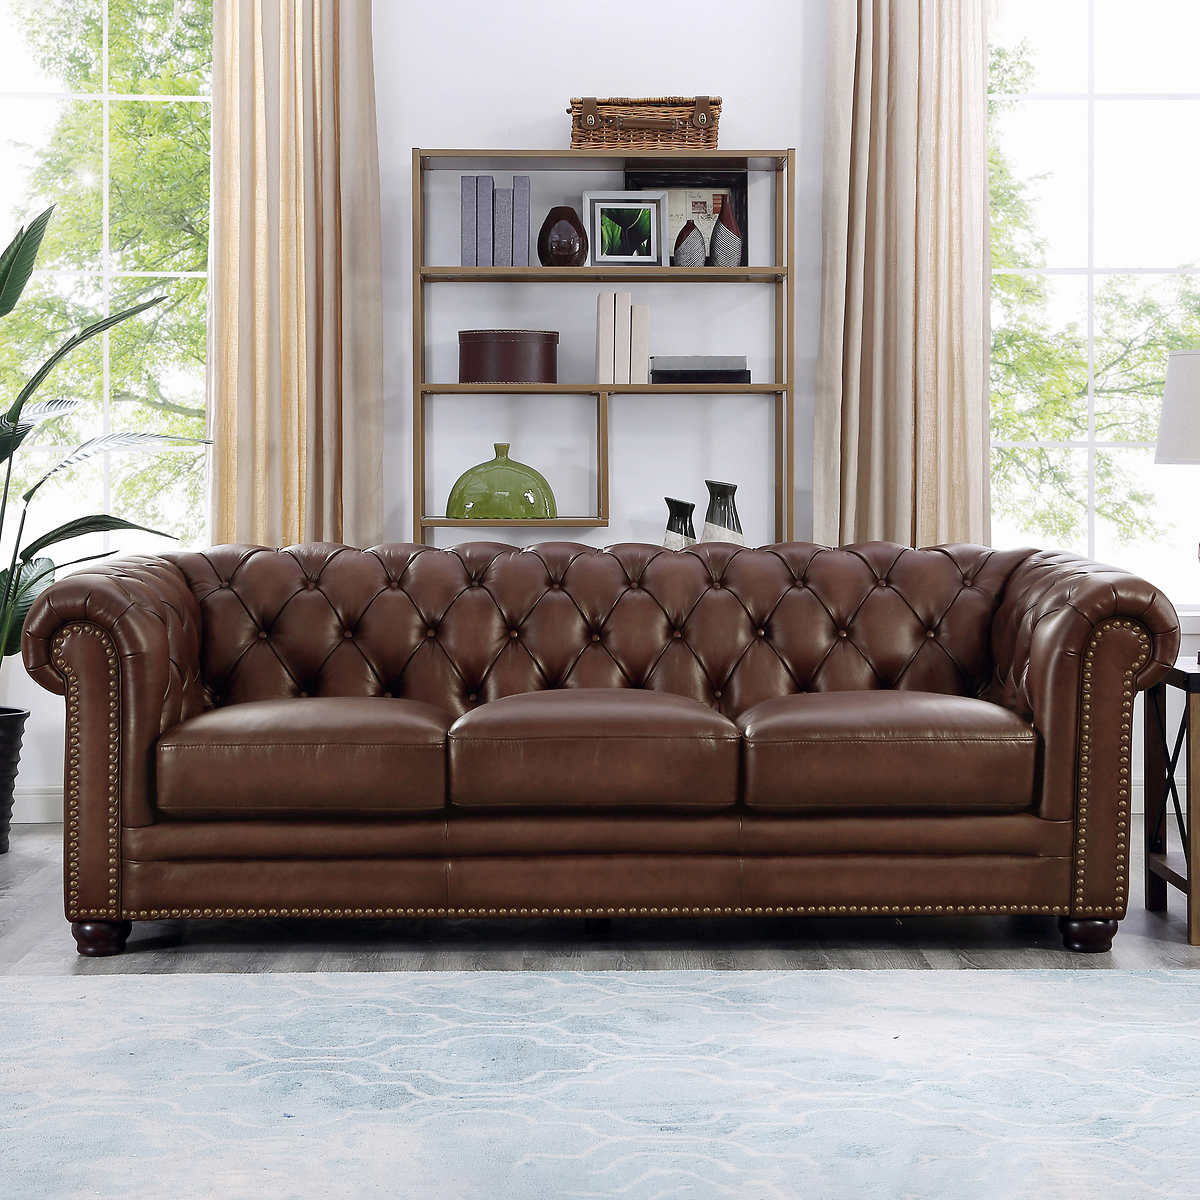 Allington Top Grain Leather Sofa, Tufted Brown Leather Sectional